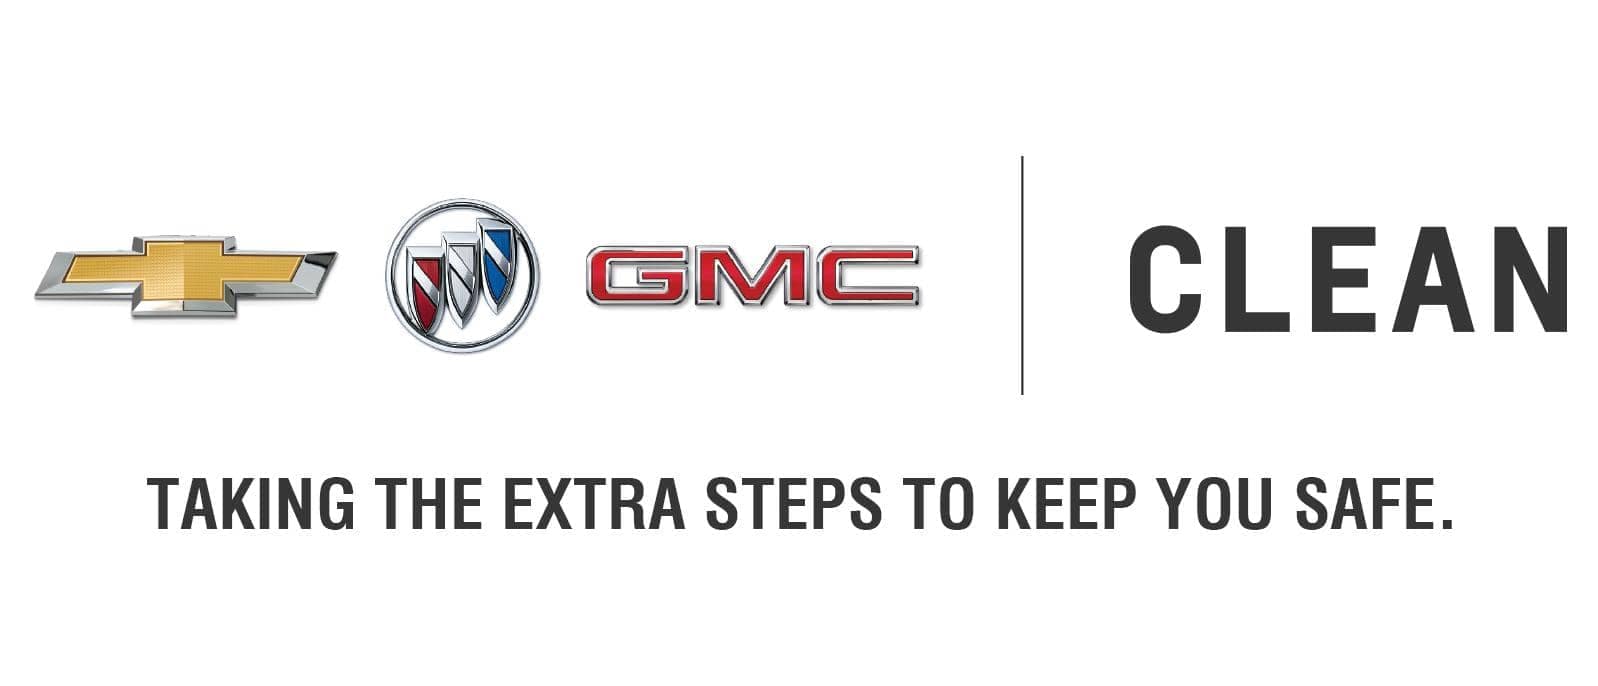 GMCA-clean-extra steps banner